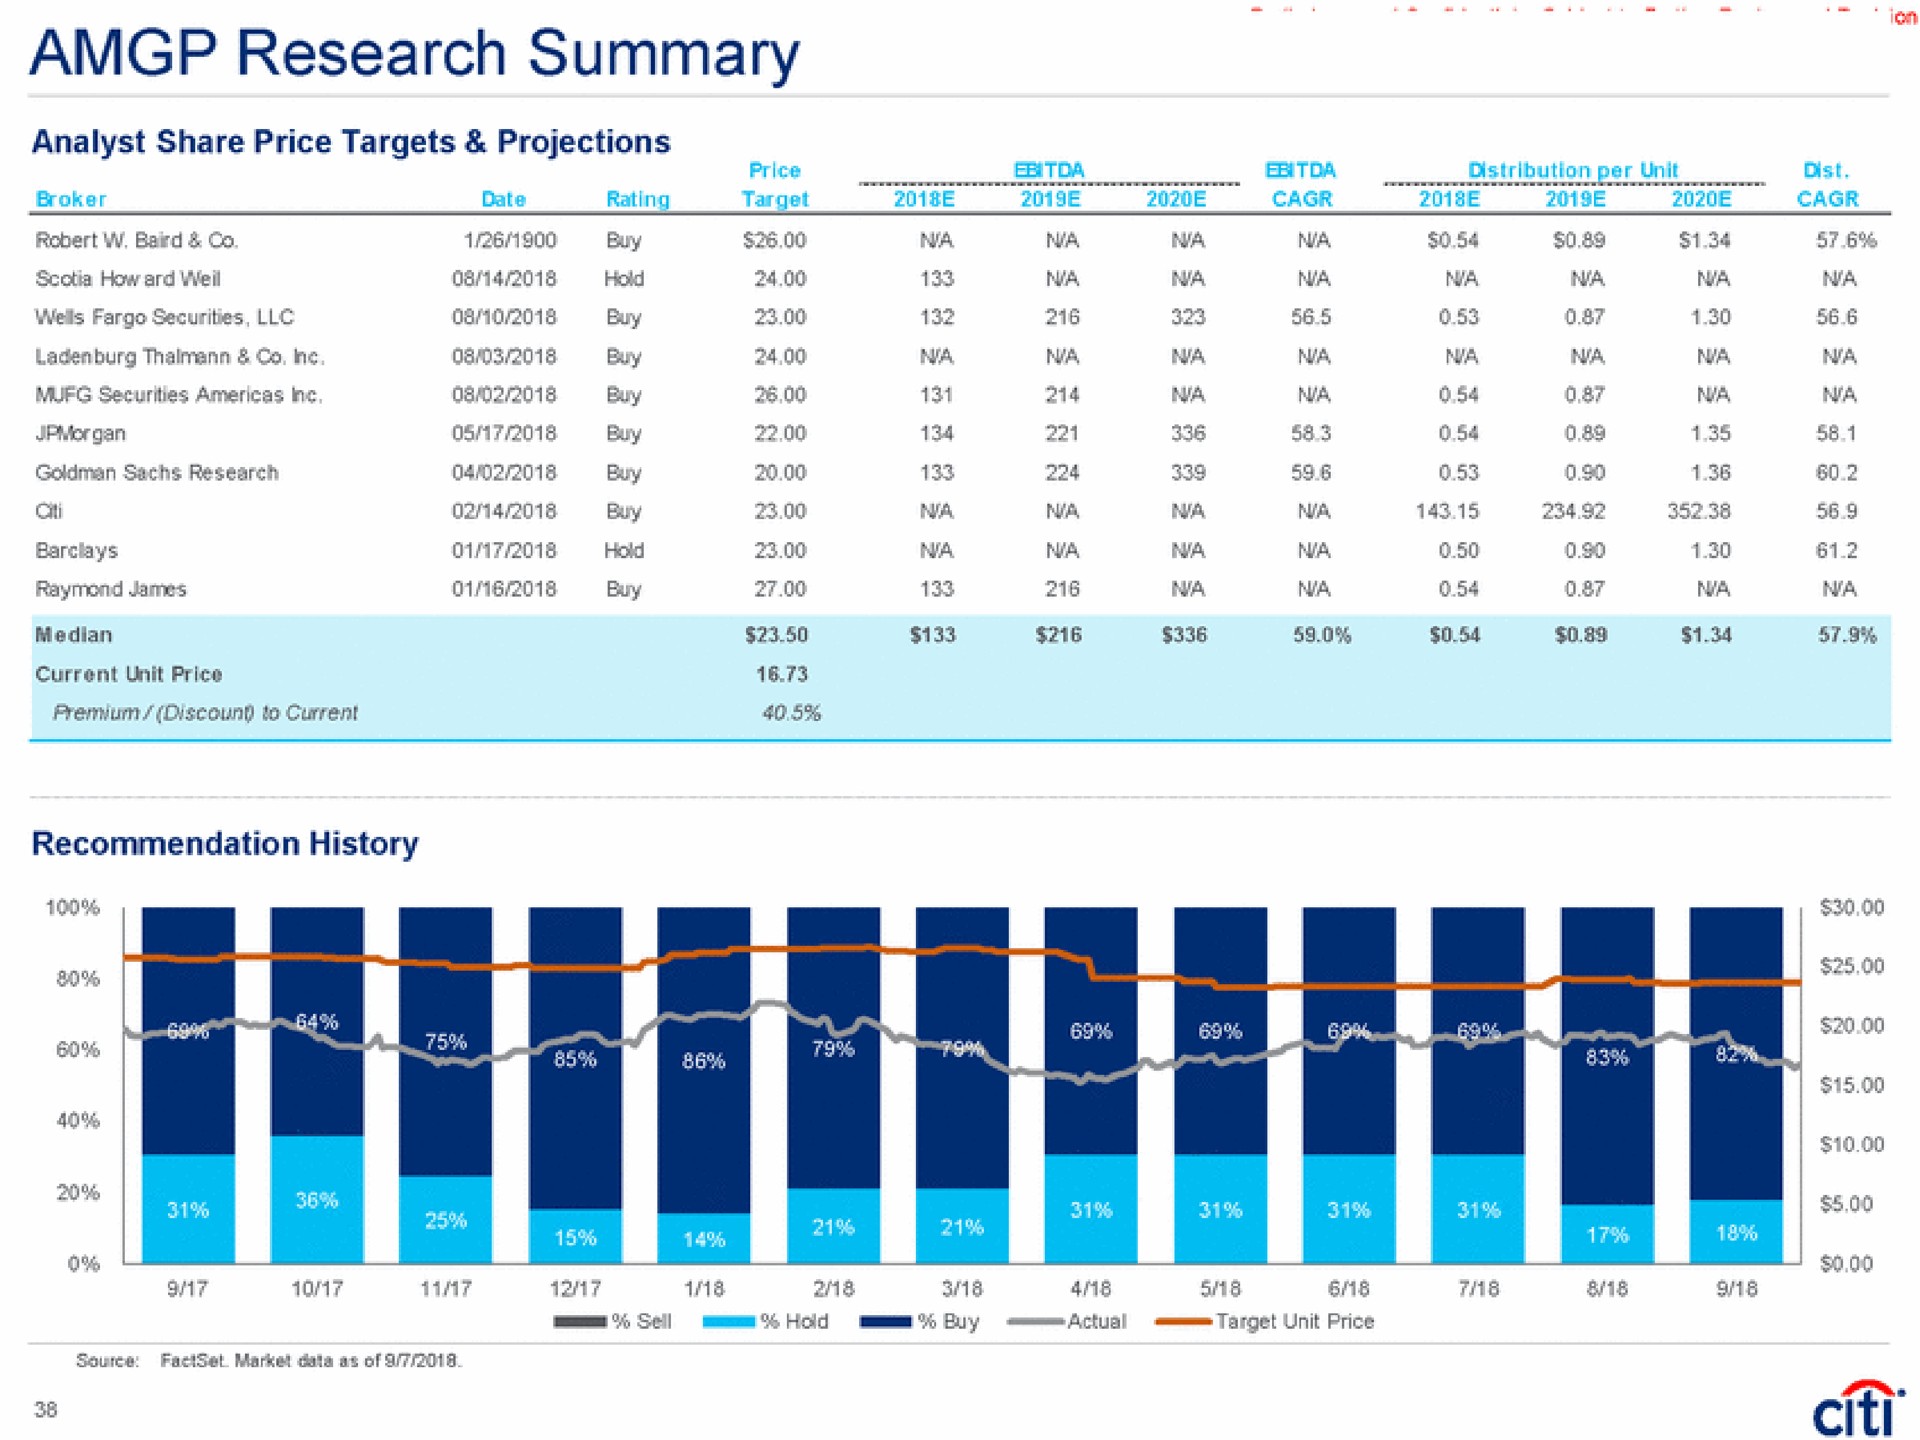 research summary analyst share price targets projections price per wit mist recommendation history | Citi